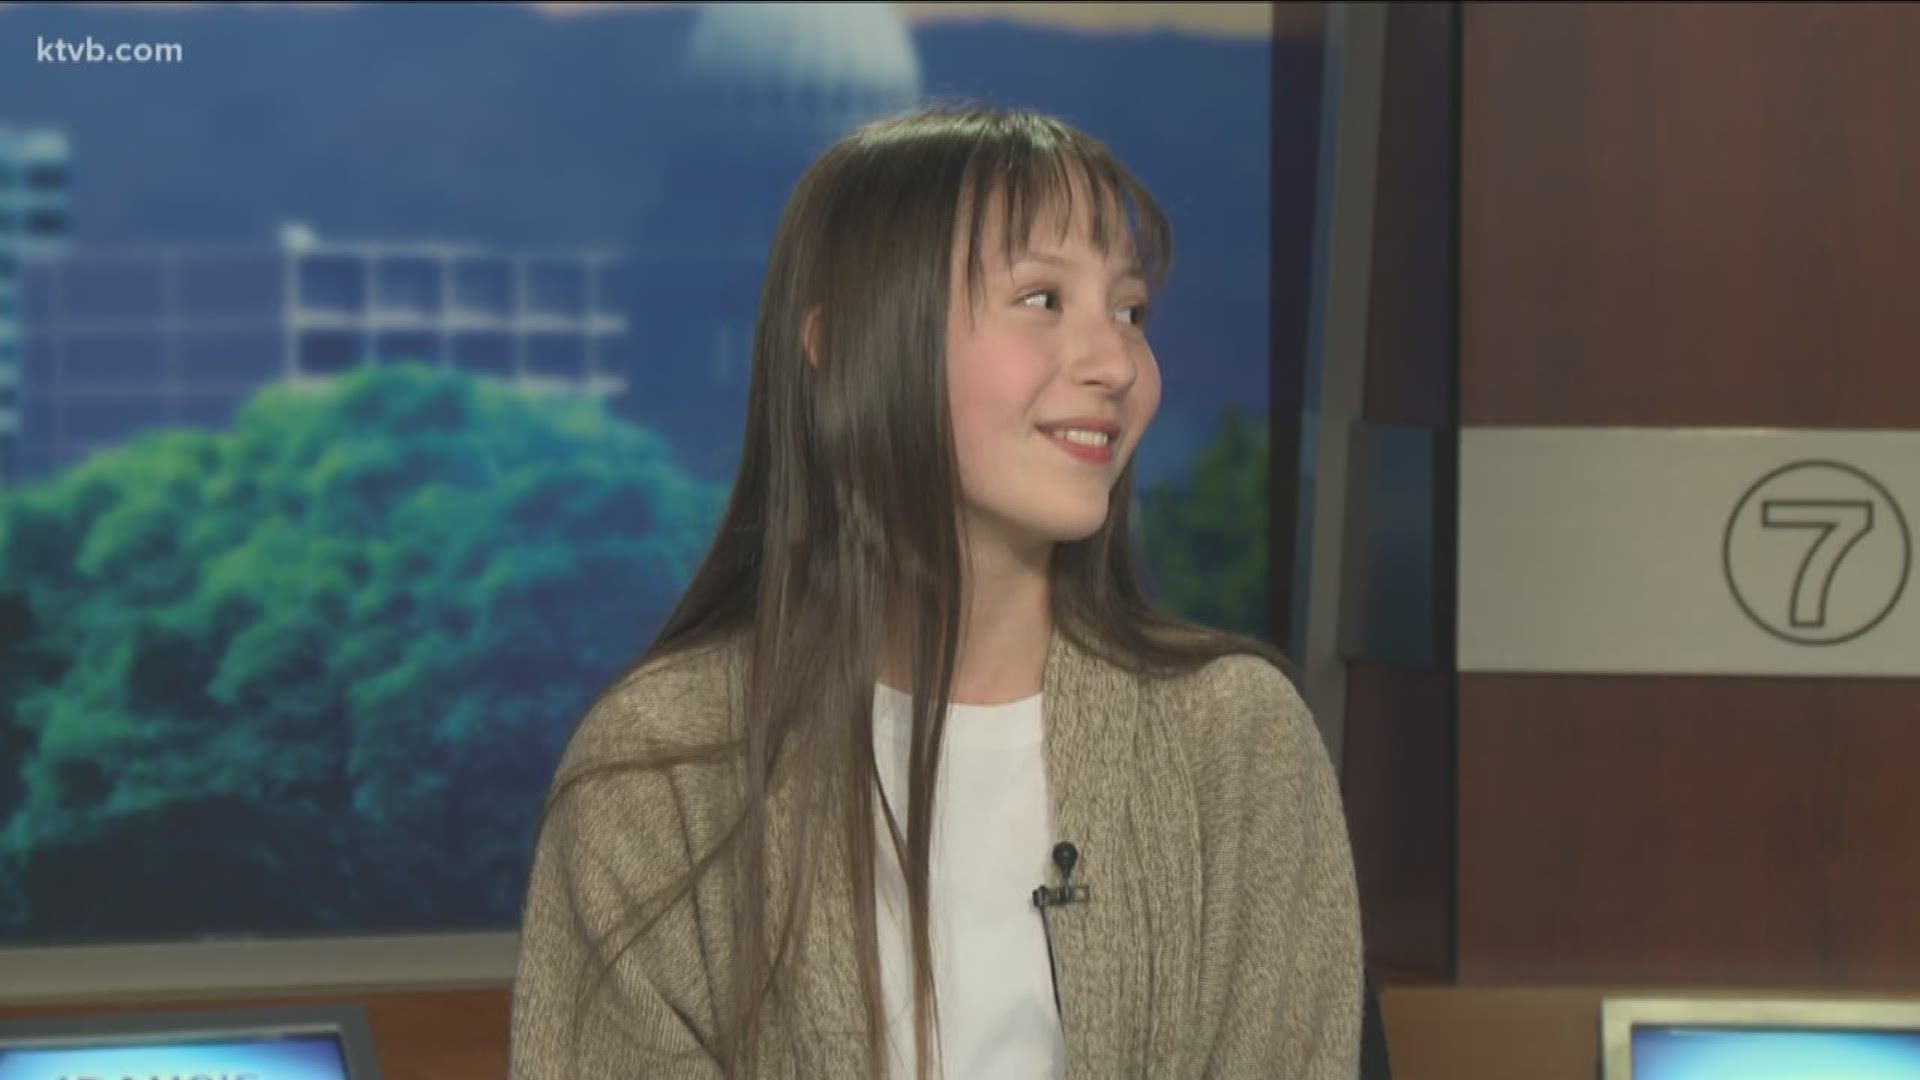 Hope Segoine, the voice of the "Baby Shark" was in the KTVB studio Thursday to talk about the song's enormous success.